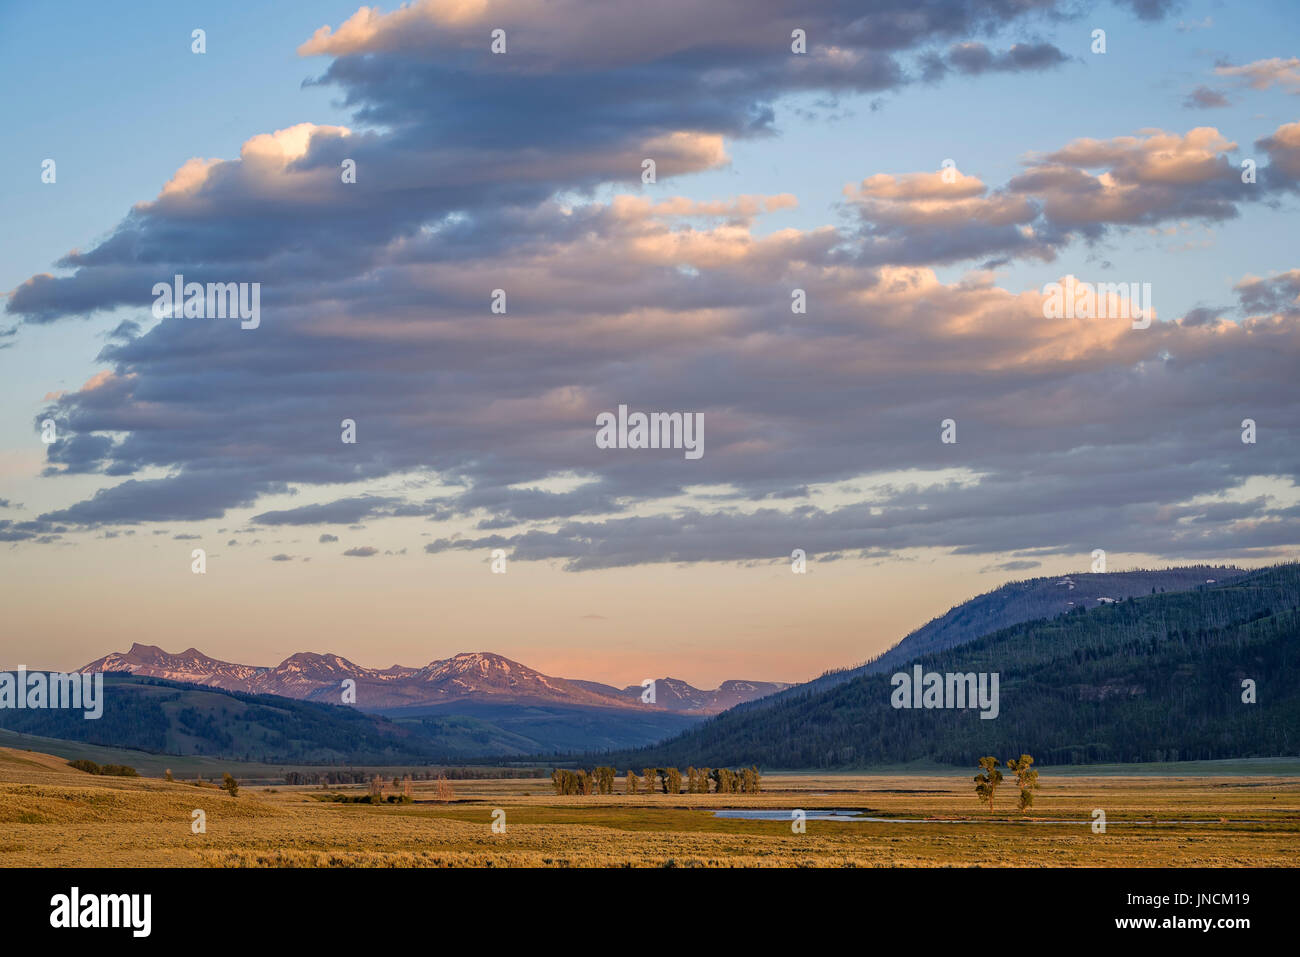 Lamar Valley and the Absaroka Mountains, Yellowstone National Park, Wyoming. Stock Photo